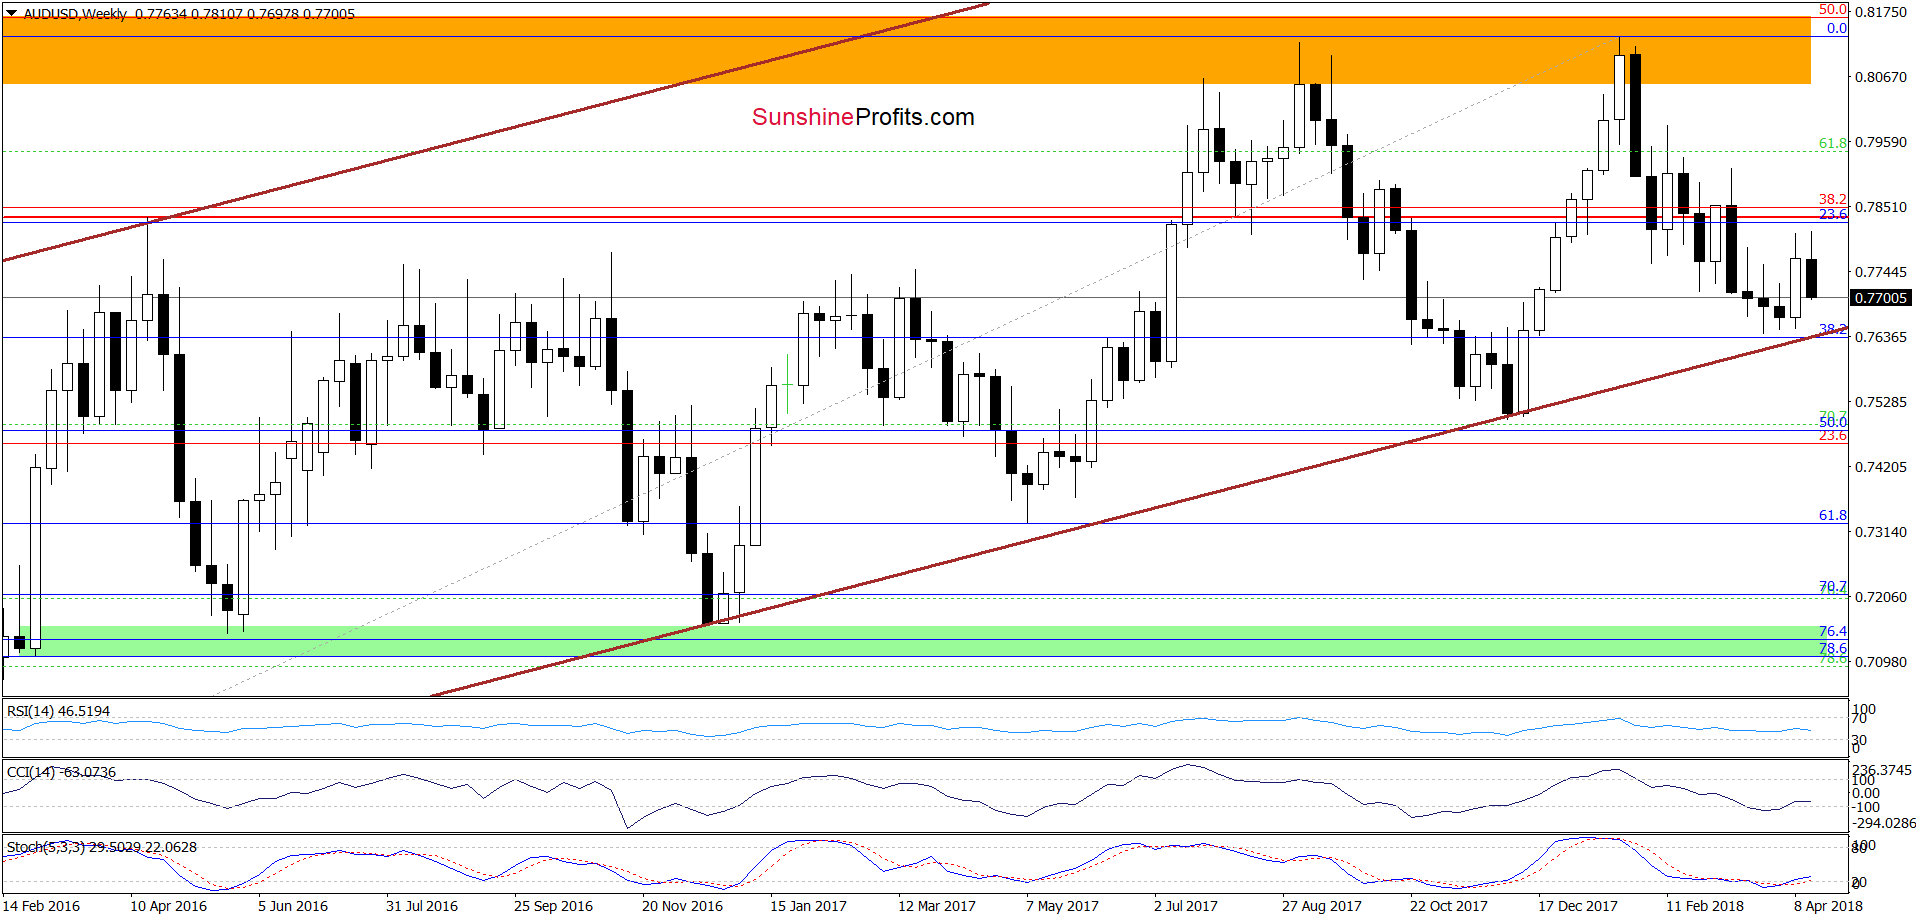 AUD/USD - weekly chart